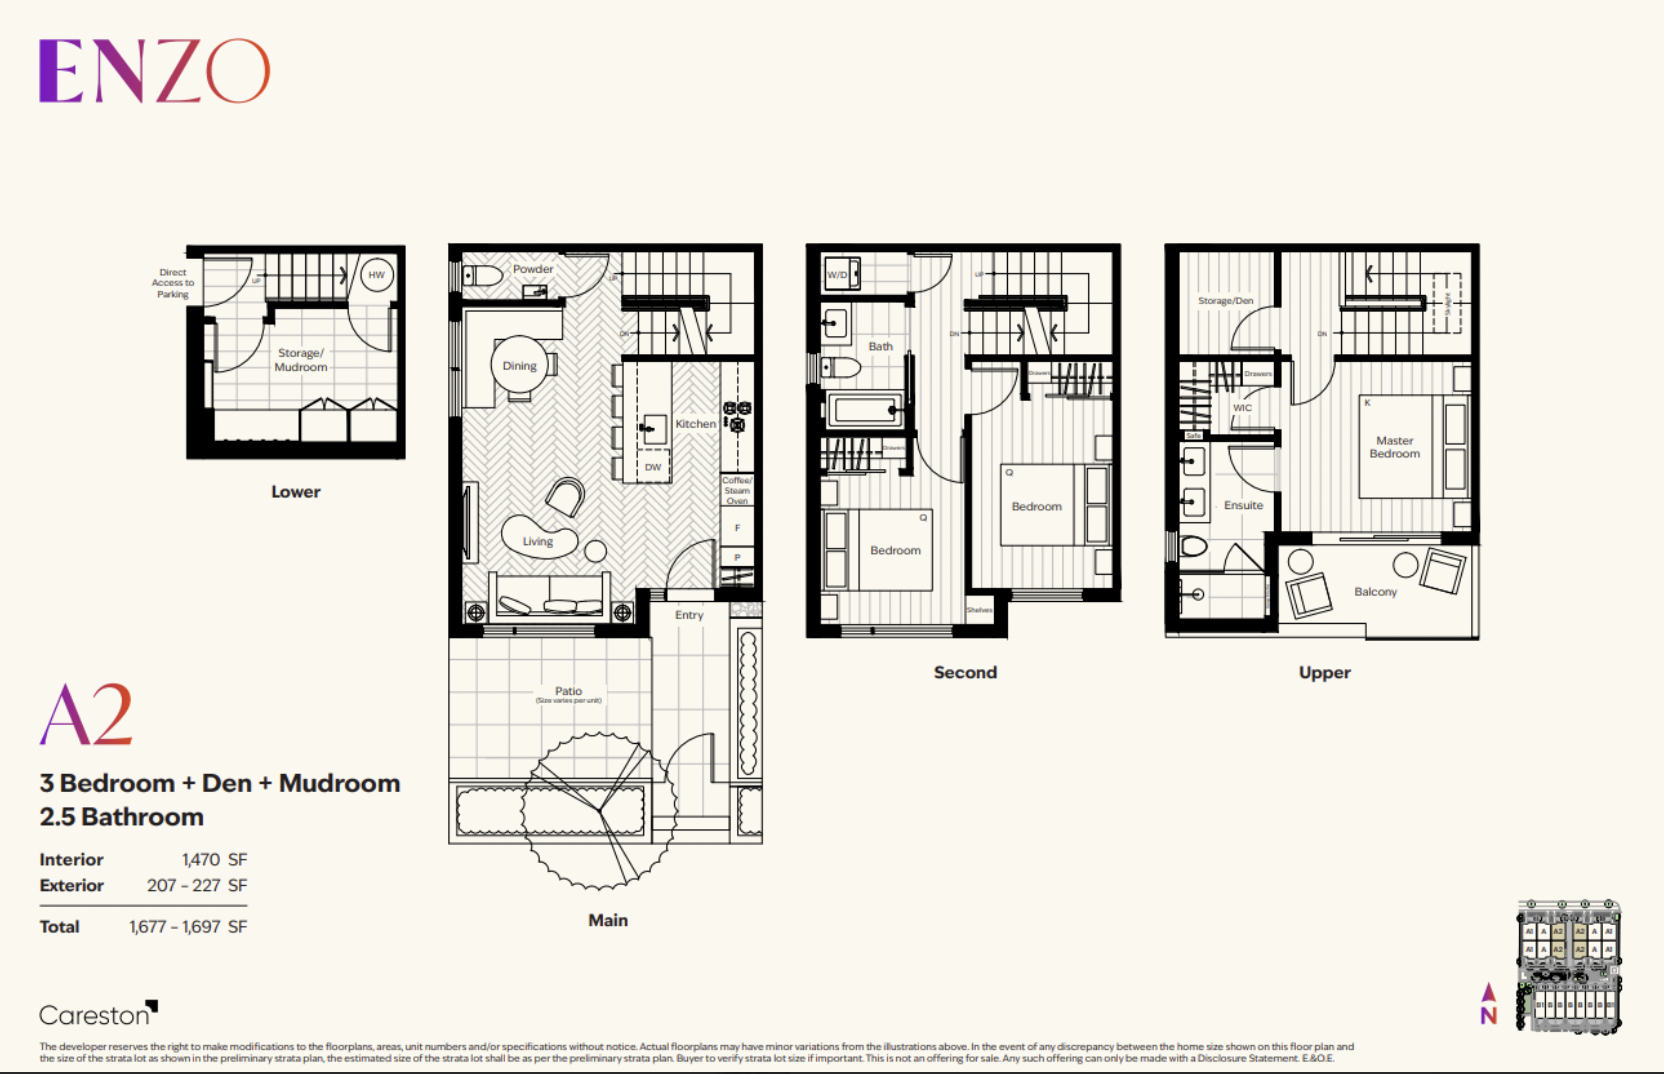 Vancouver townhouses for sale enzo A2